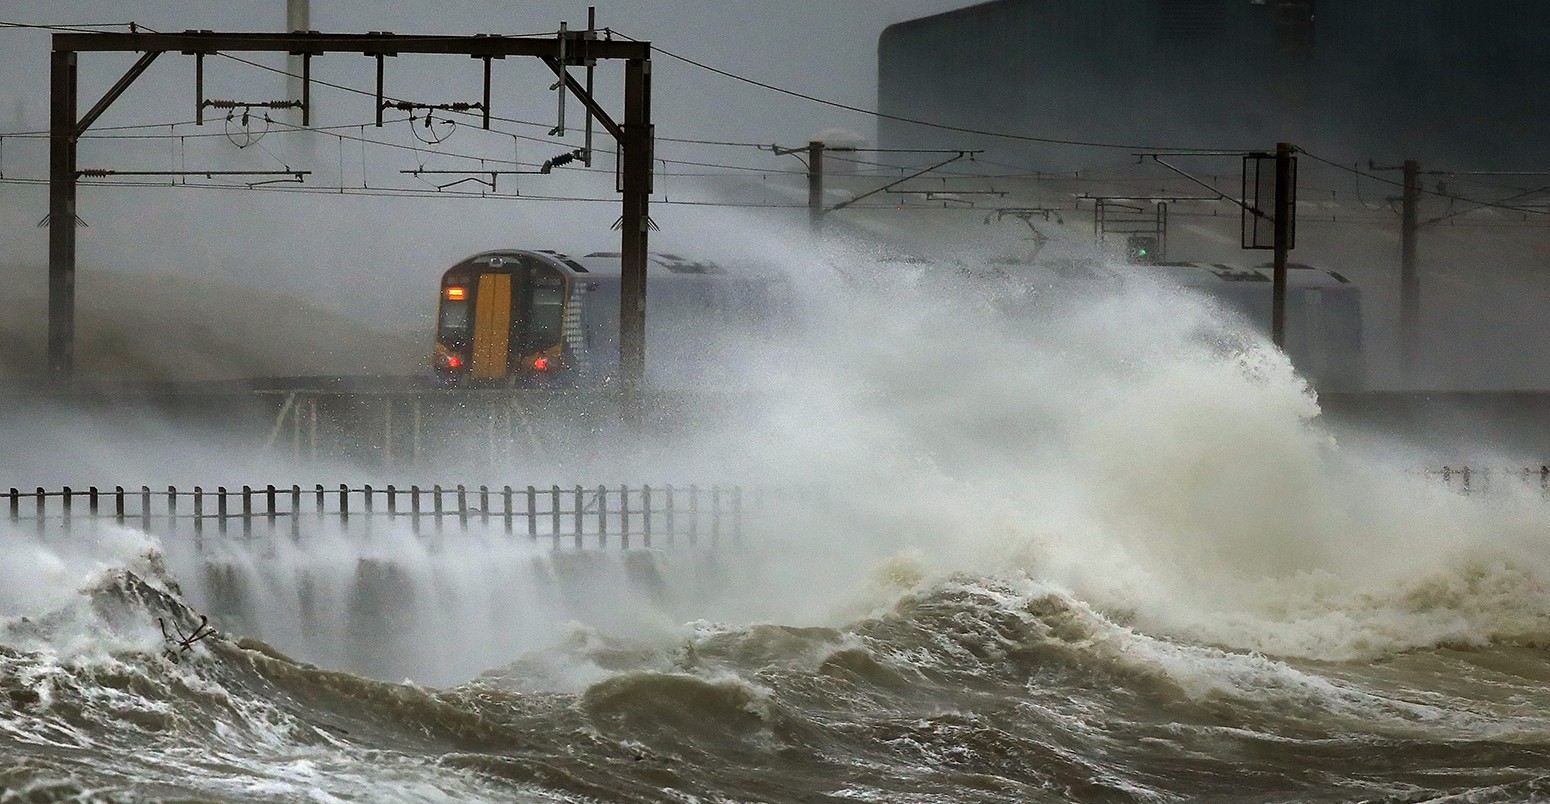 A train passes along the coast at Saltcoats in Scotland which is battered by big sea waves 3 January 2014